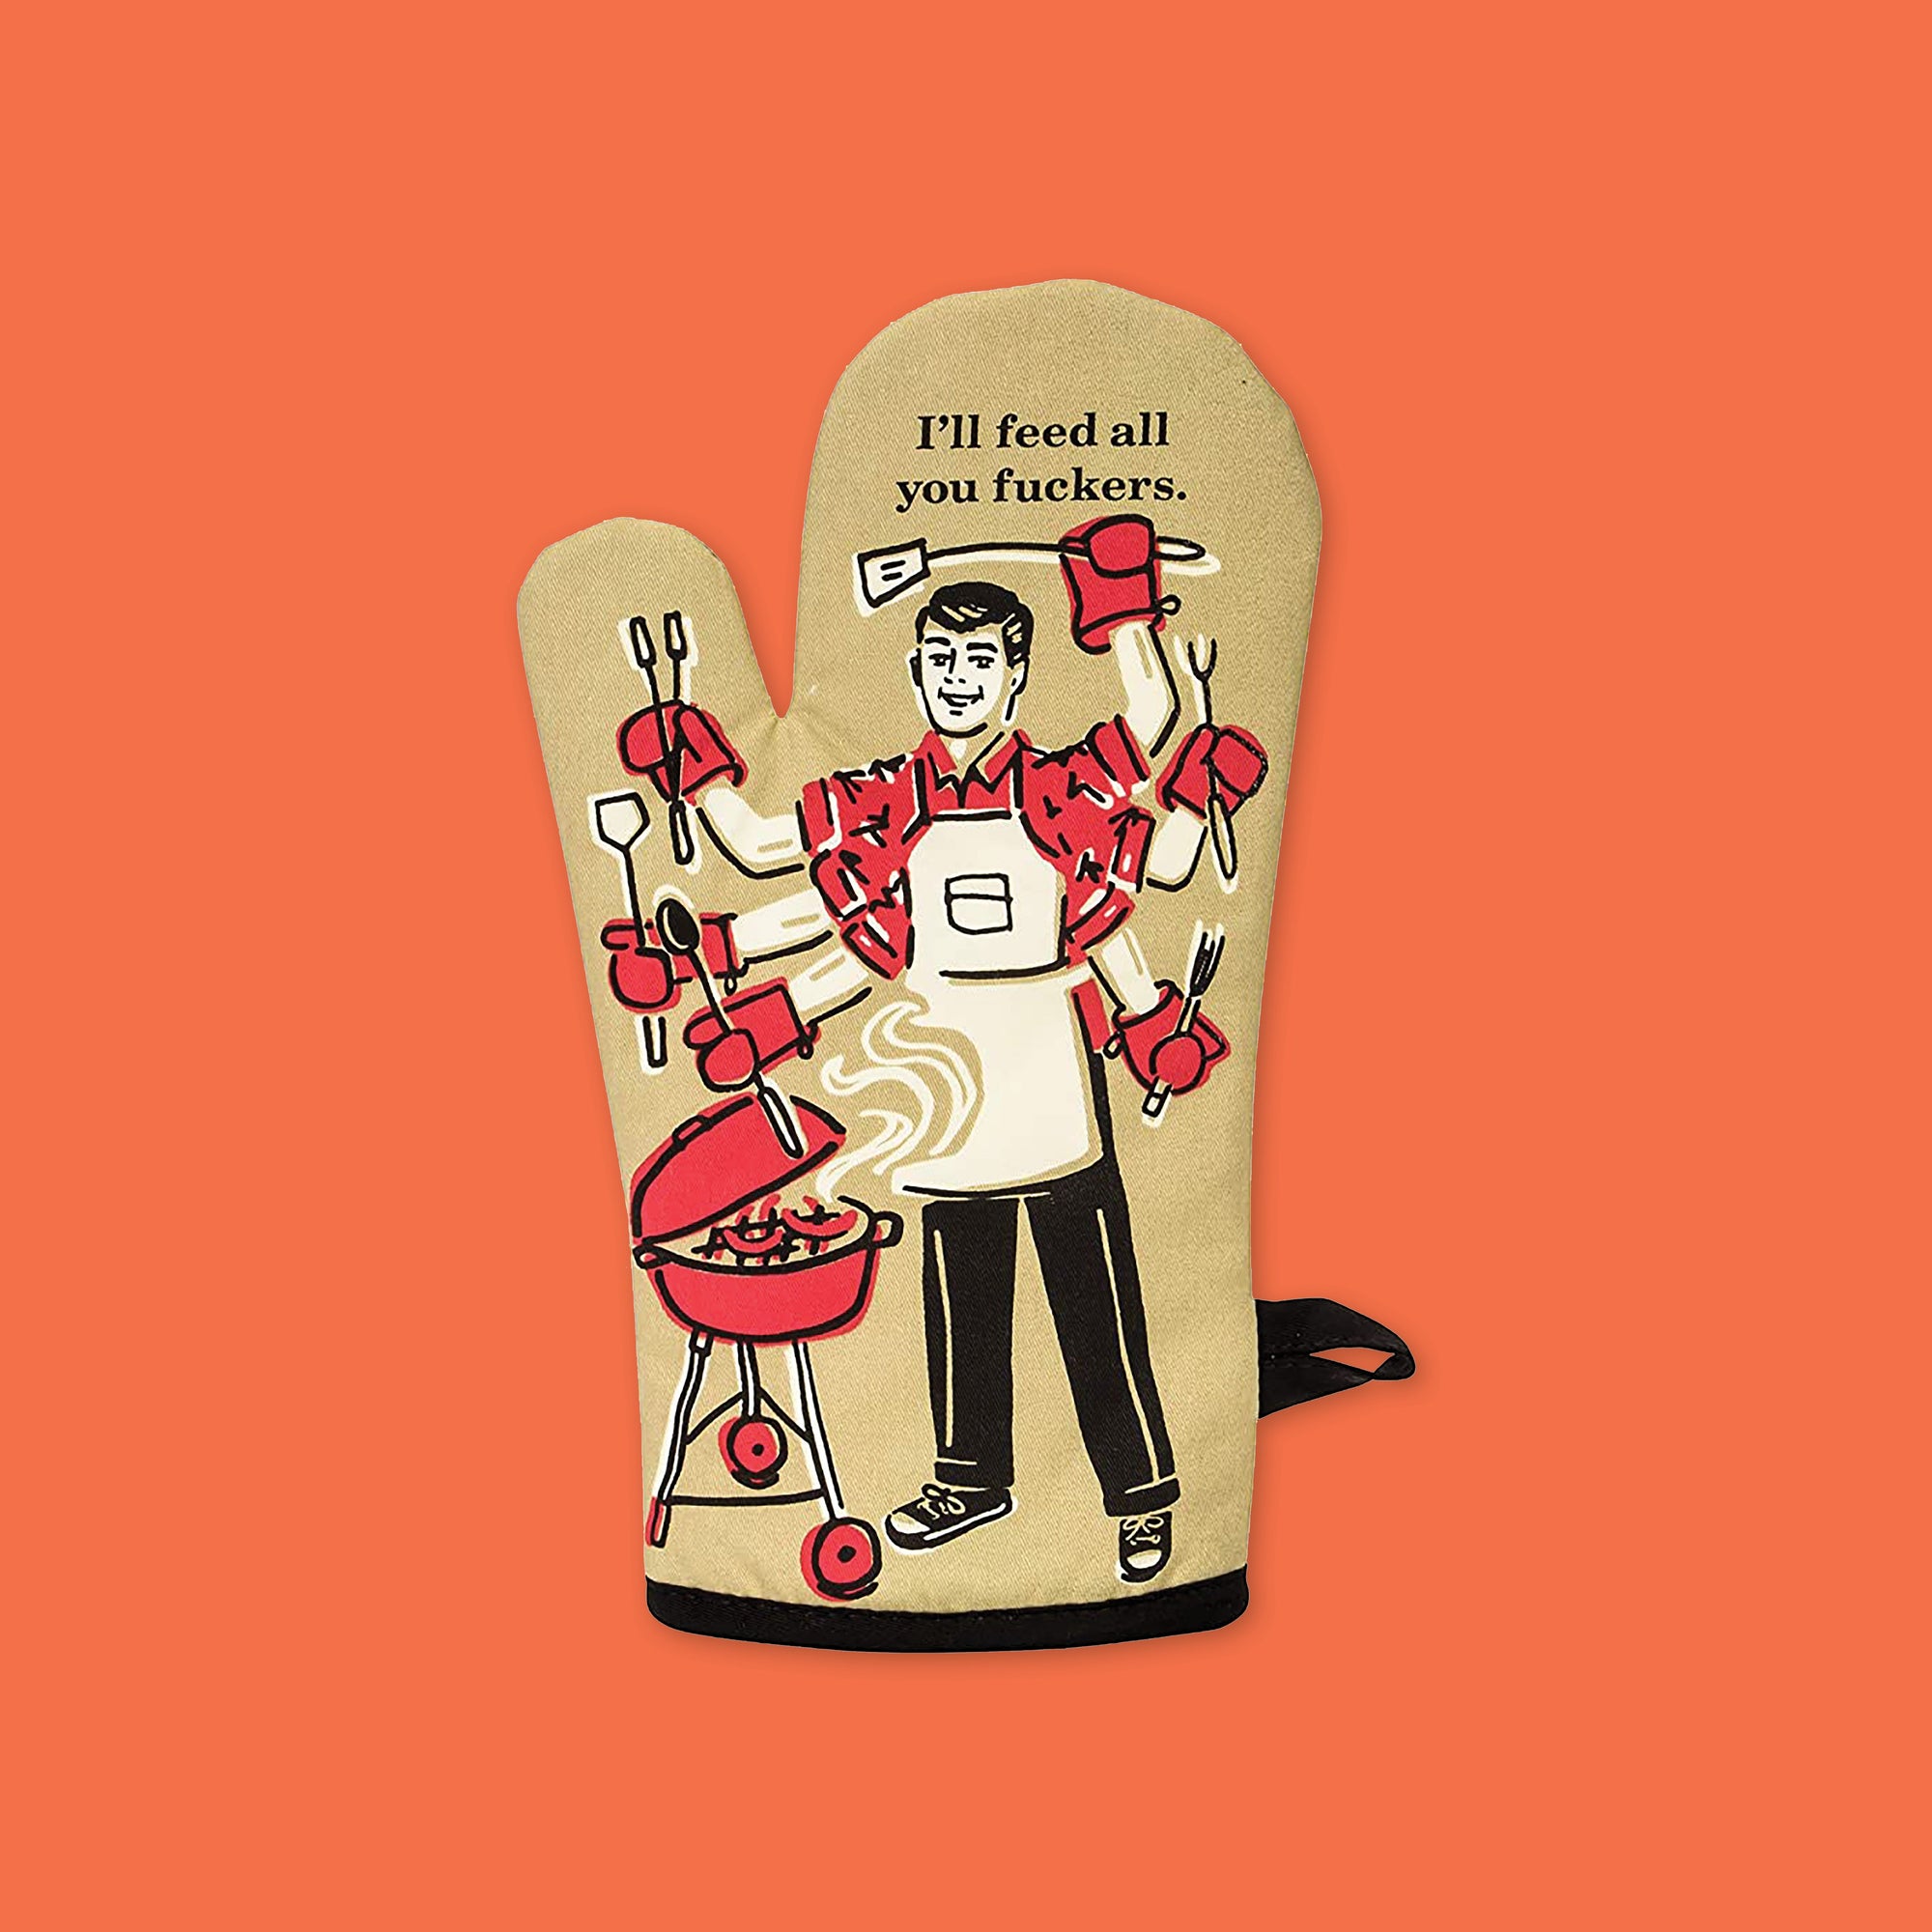 On an orangey-red background sits an oven mitt. The front of this khaki oven mitt has a vintage illustration of a man barbequing with six arms and hands. In each hand are bbq utensils. The colors are khaki, red, black, and white. At the top it says "I'll feed all you fuckers." in black serif font.